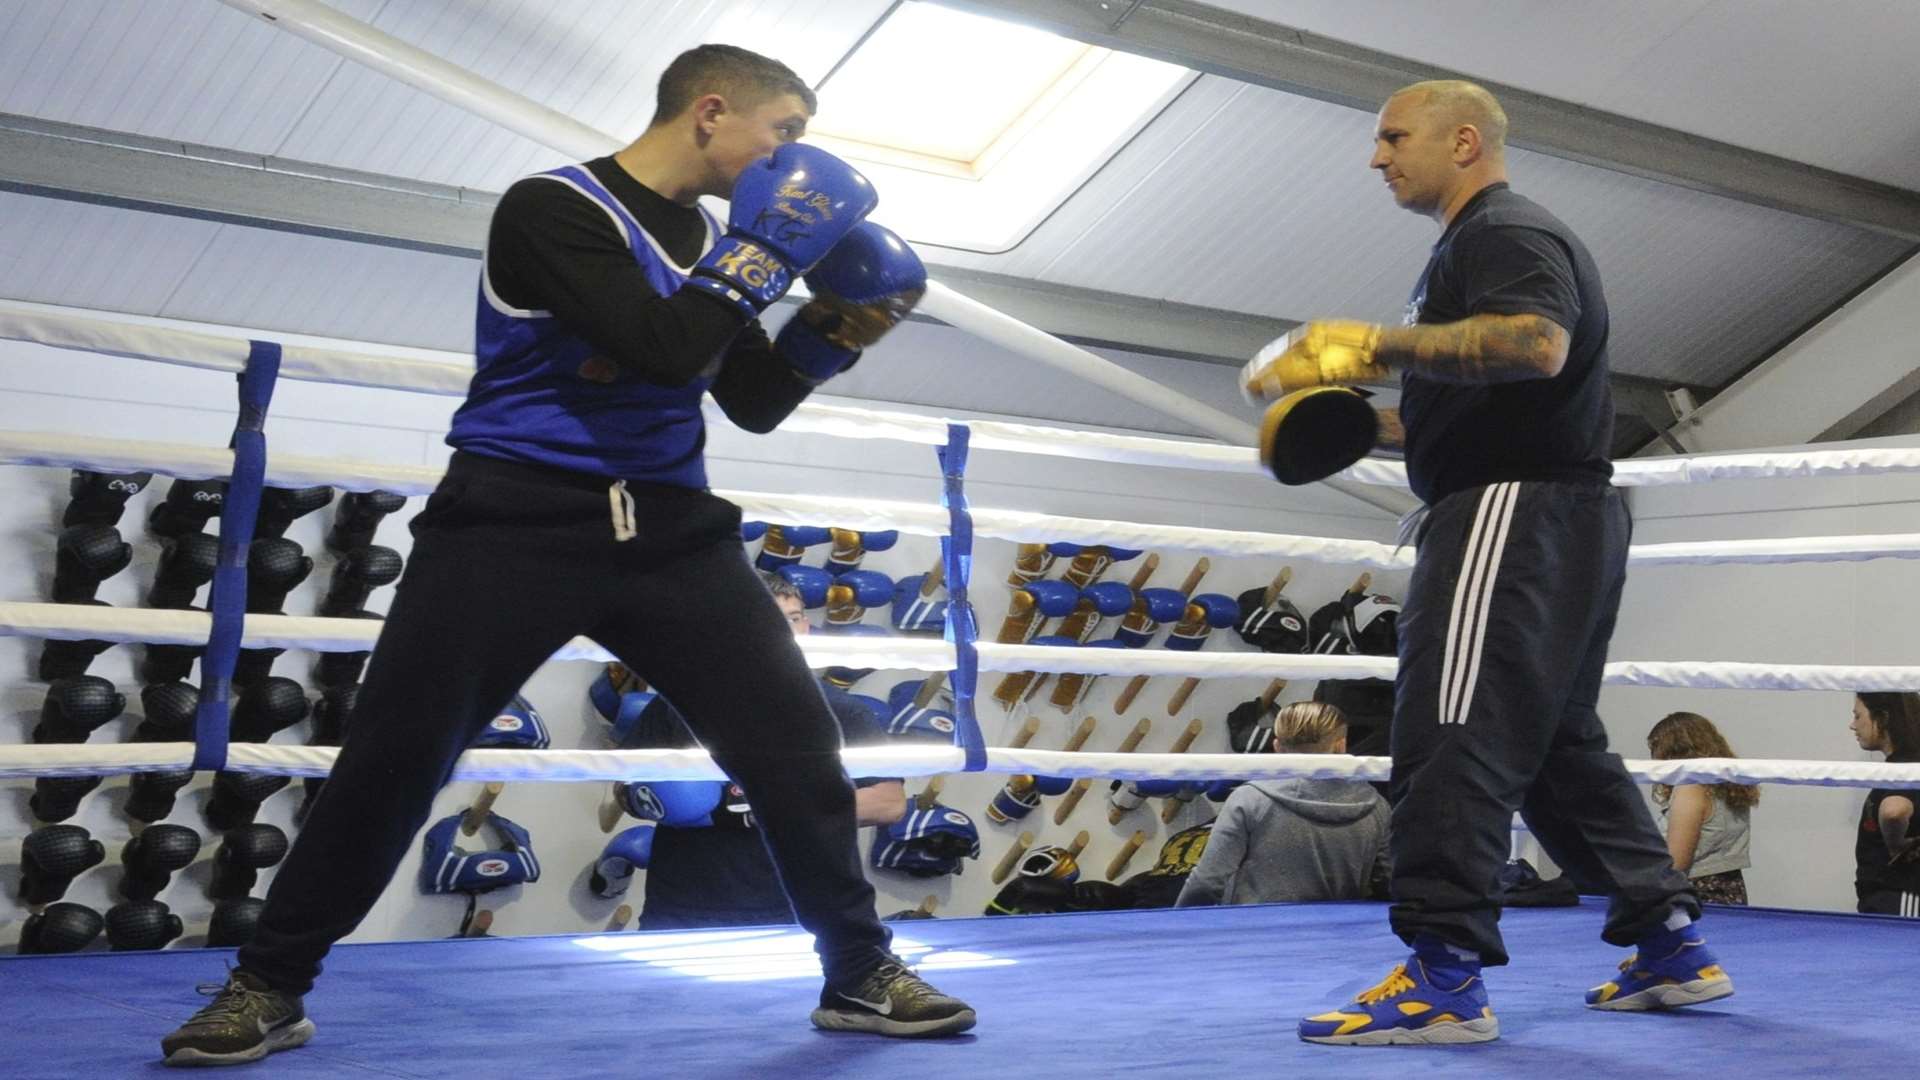 A sparring session in the new gym Picture: Steve Crispe